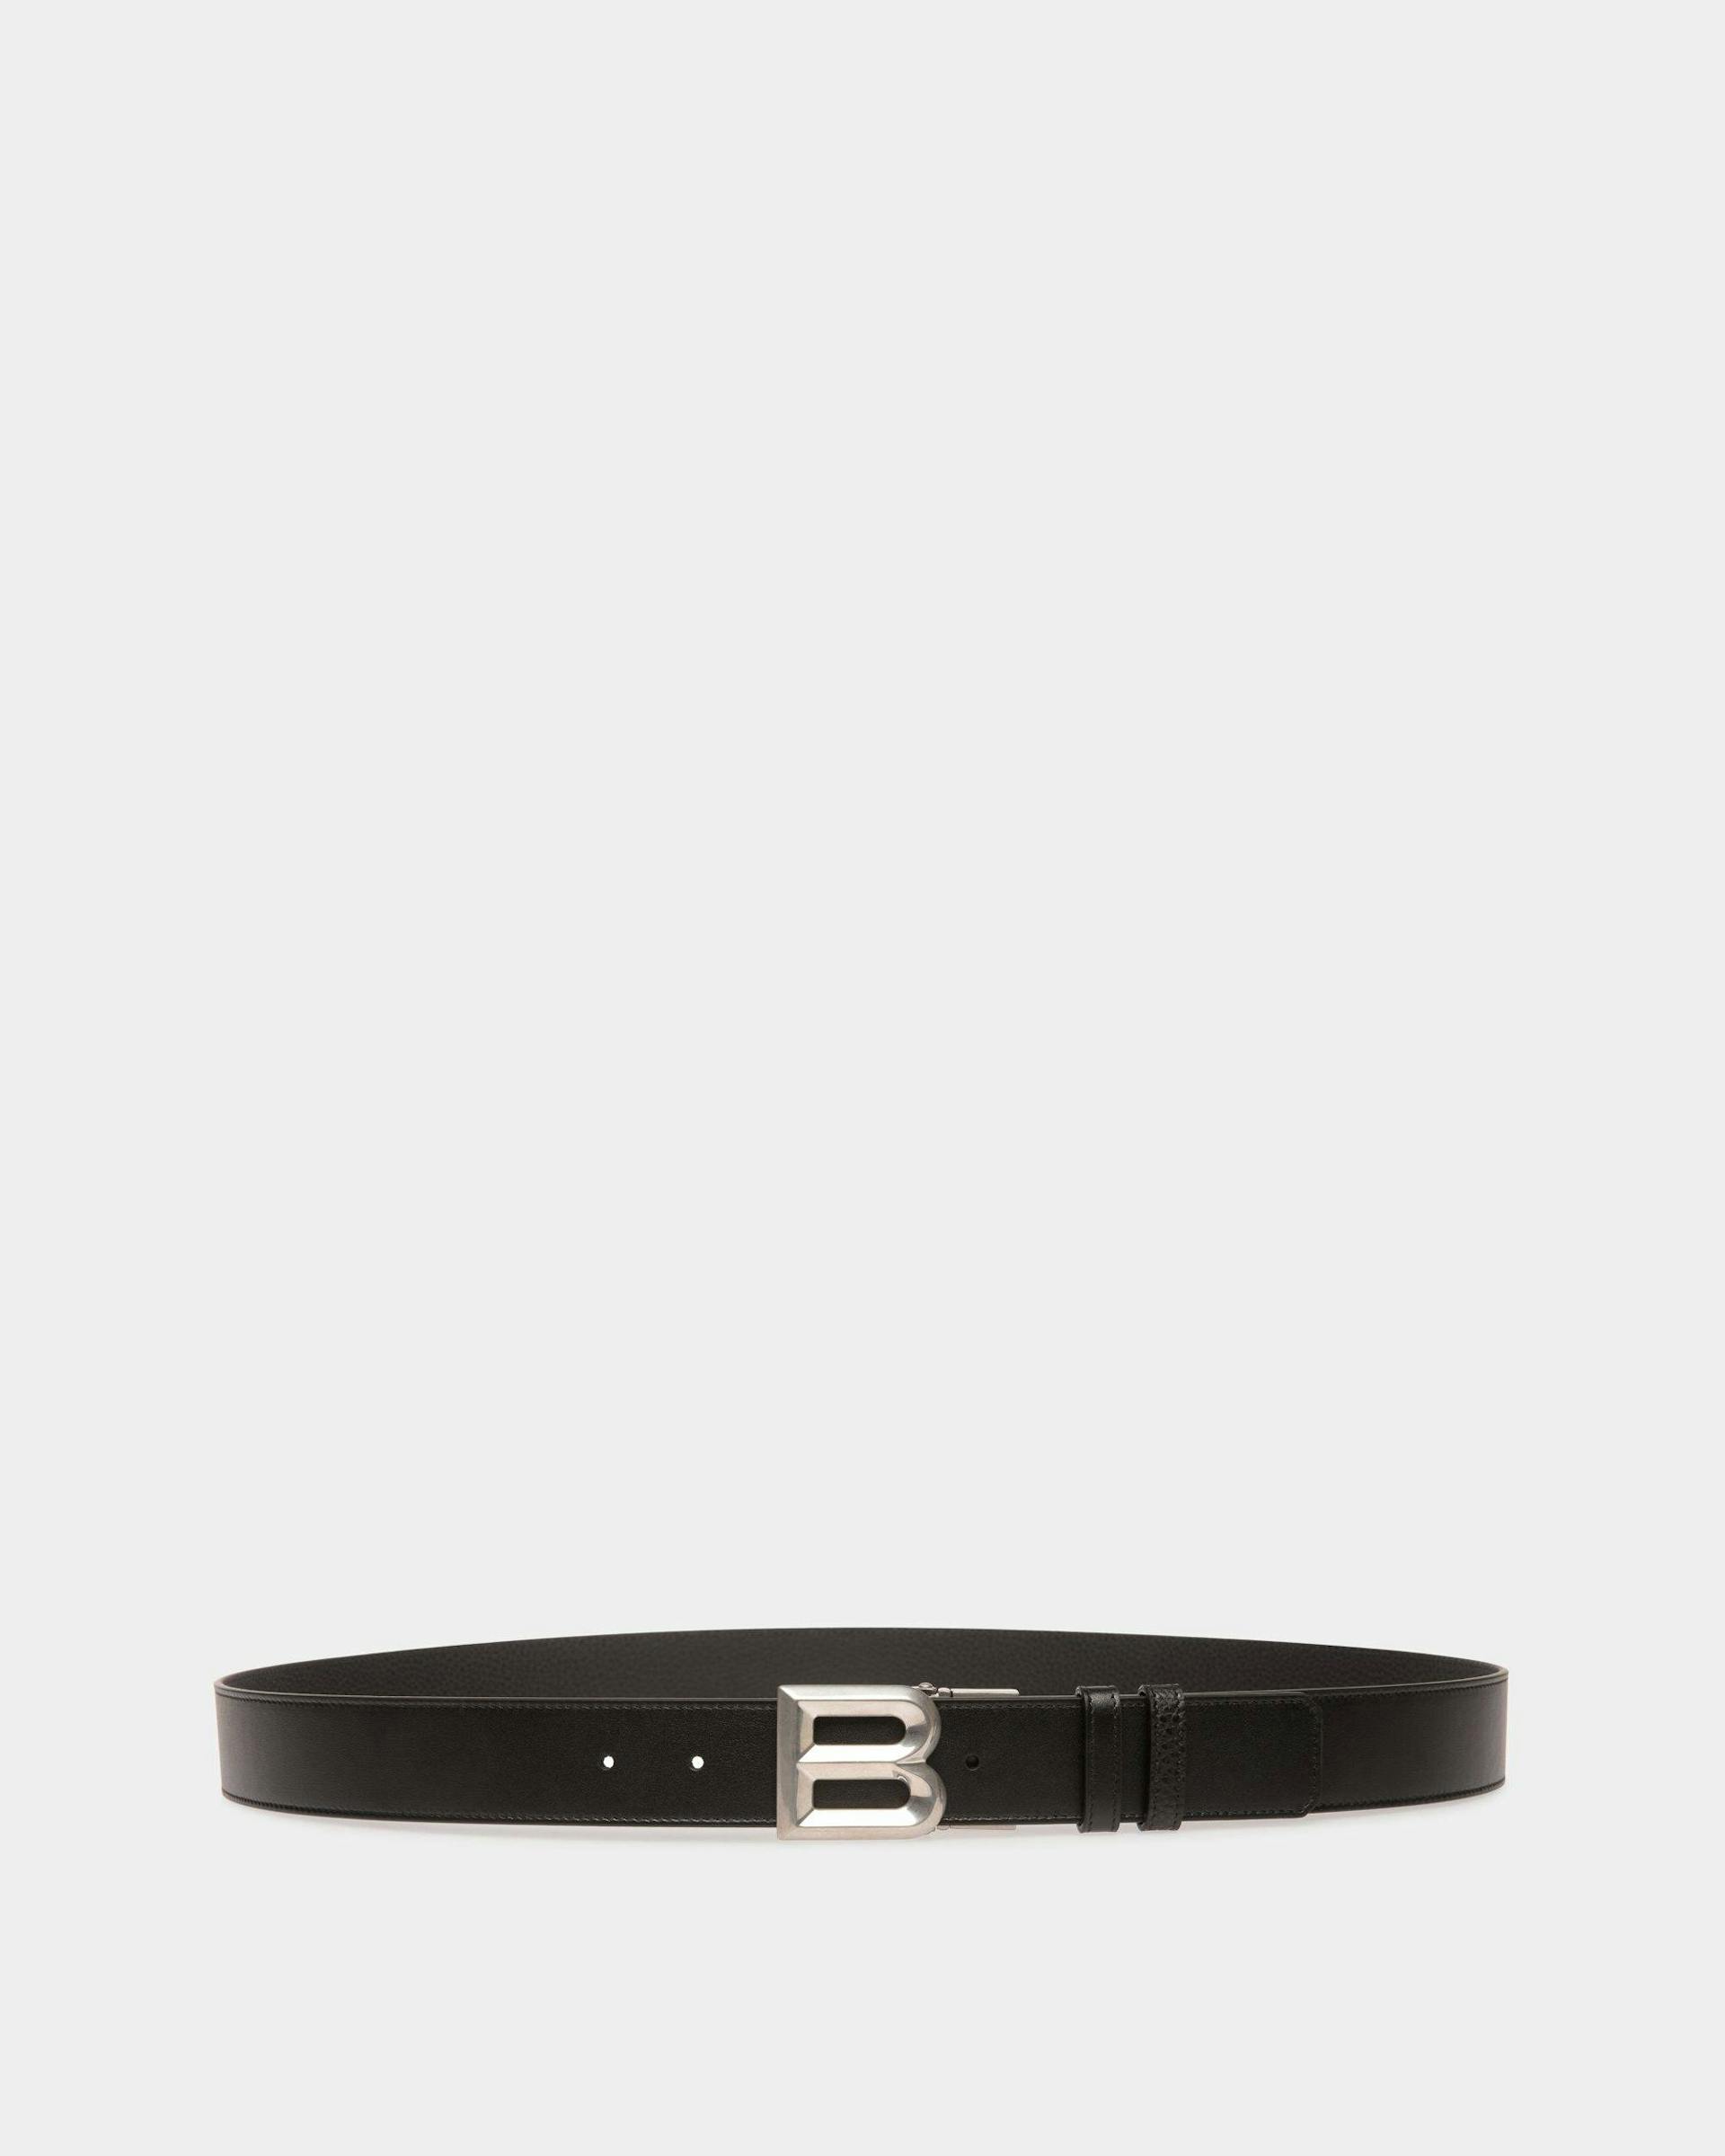 Men's B Bold 35mm Reversible And Adjustable Belt in Black Leather | Bally | Still Life Front